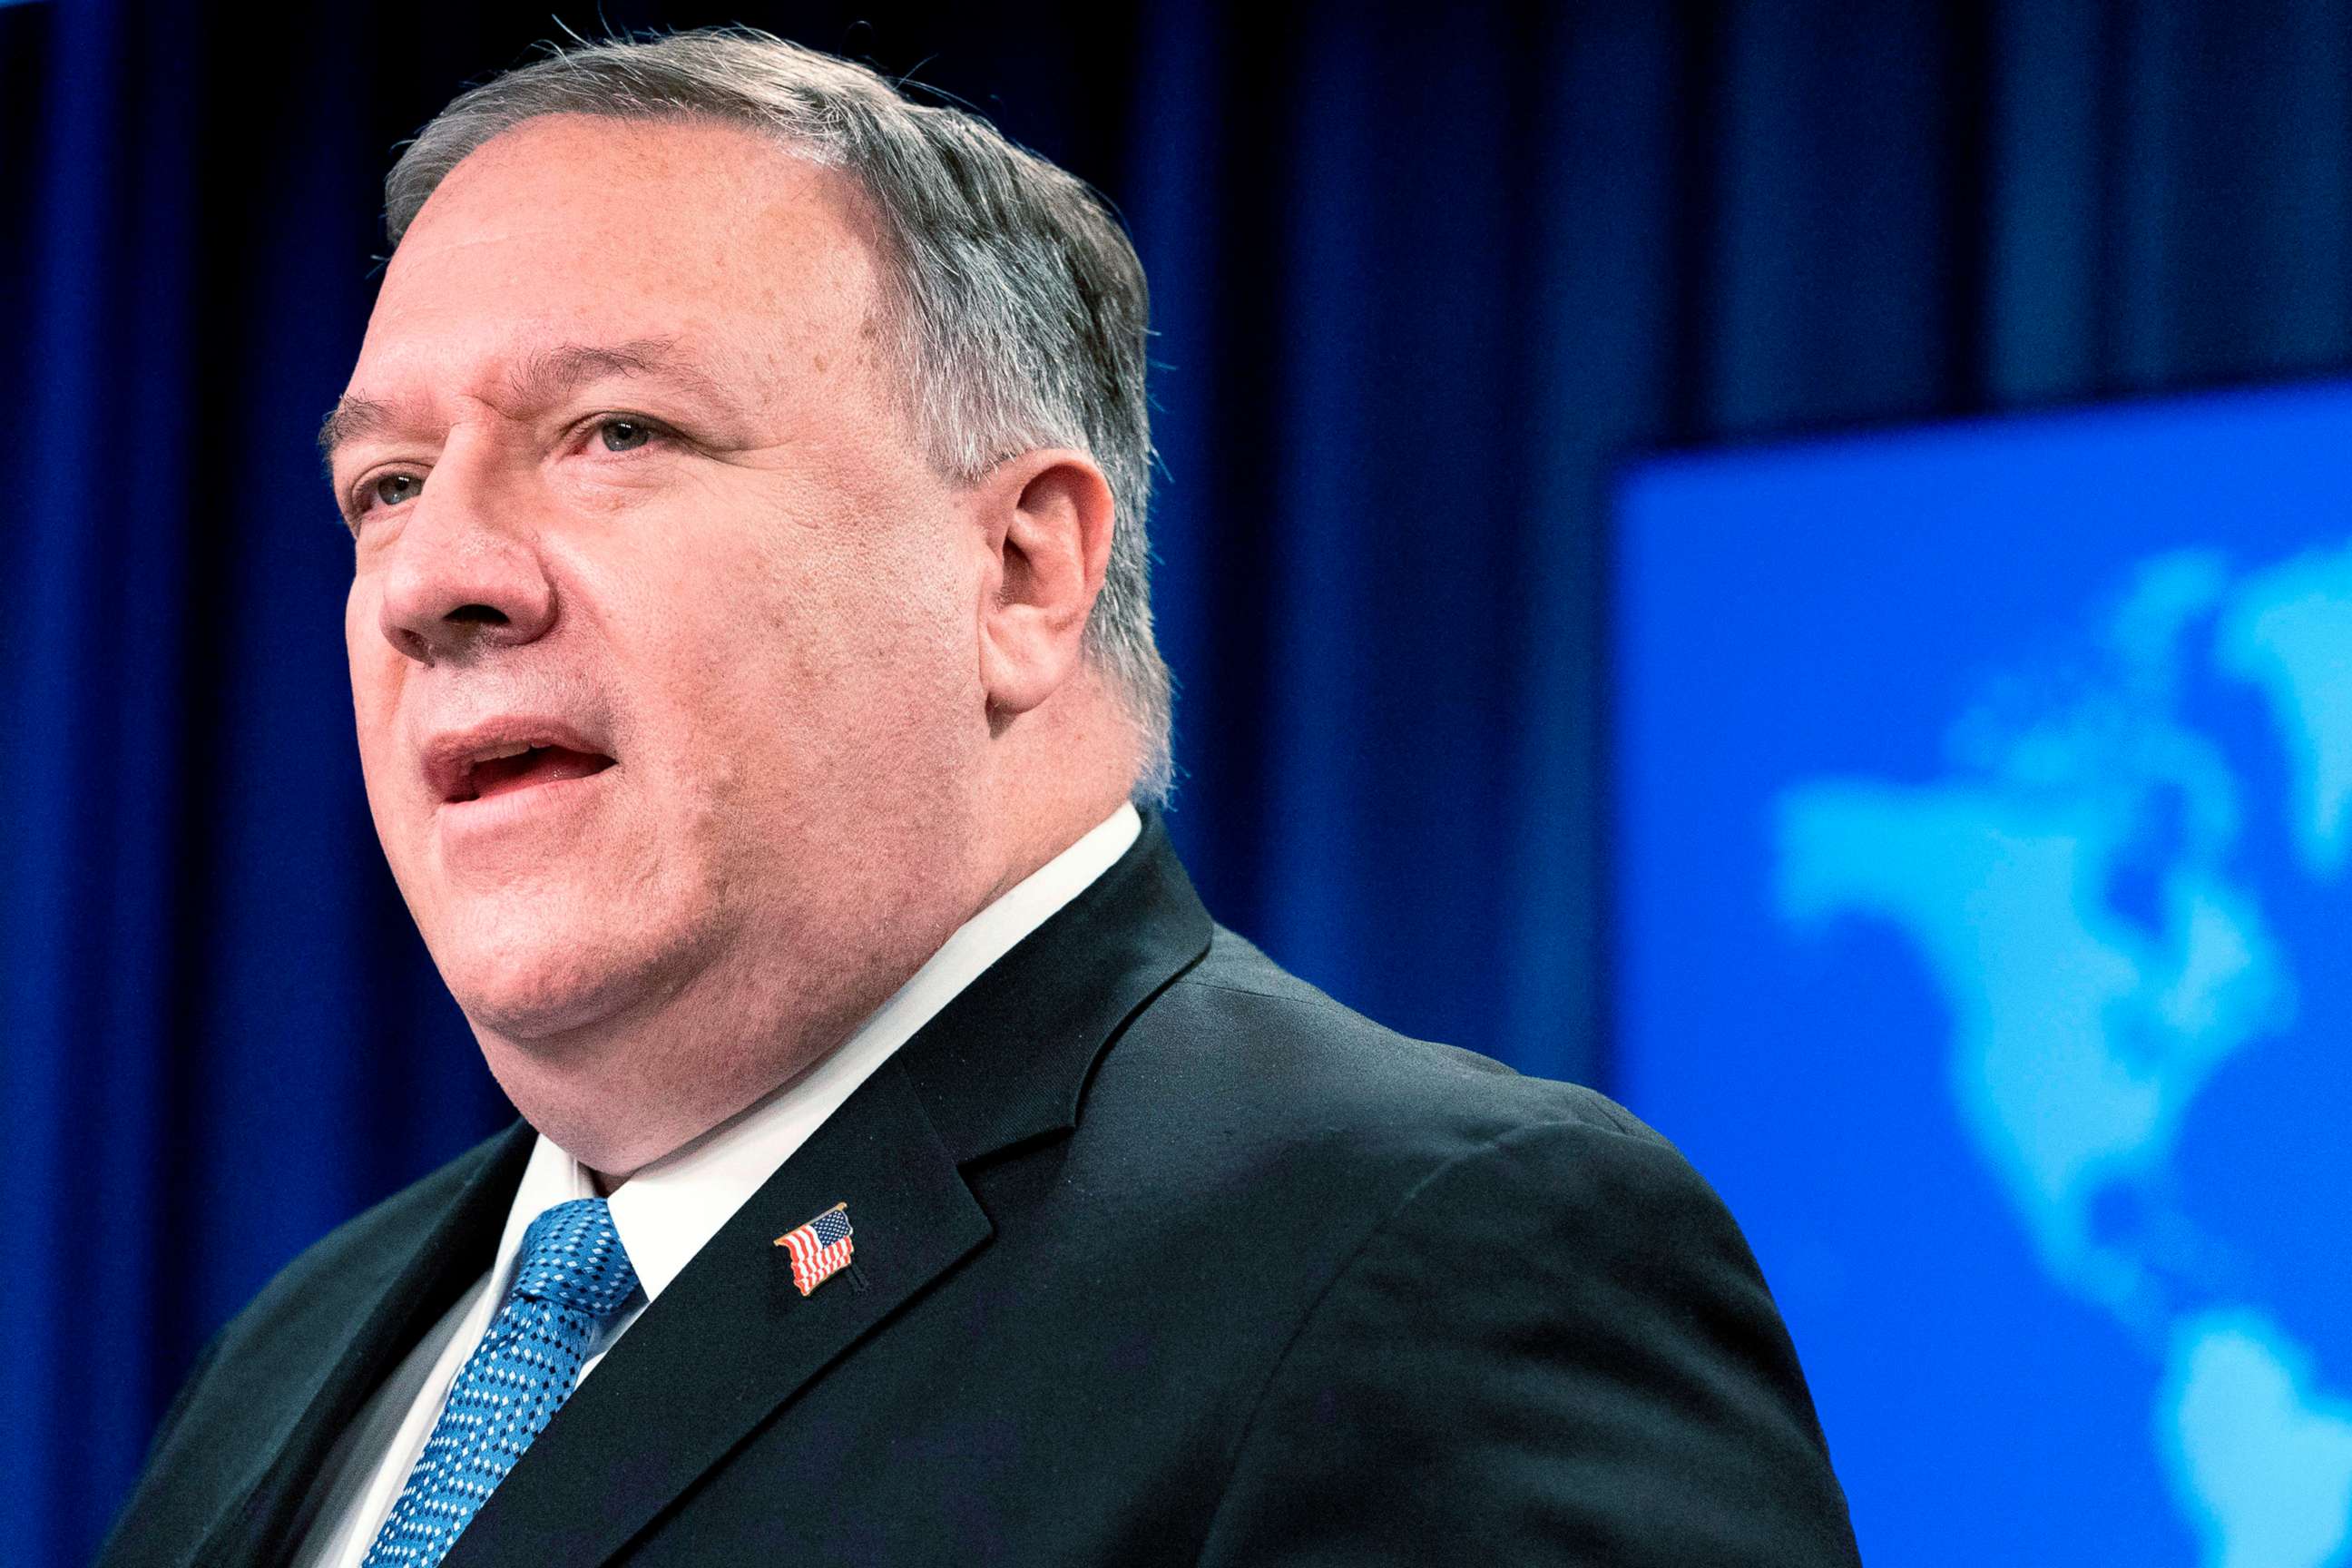 PHOTO: Secretary of State Mike Pompeo speaks during a media briefing, Nov. 10, 2020, at the State Department in Washington, D.C.